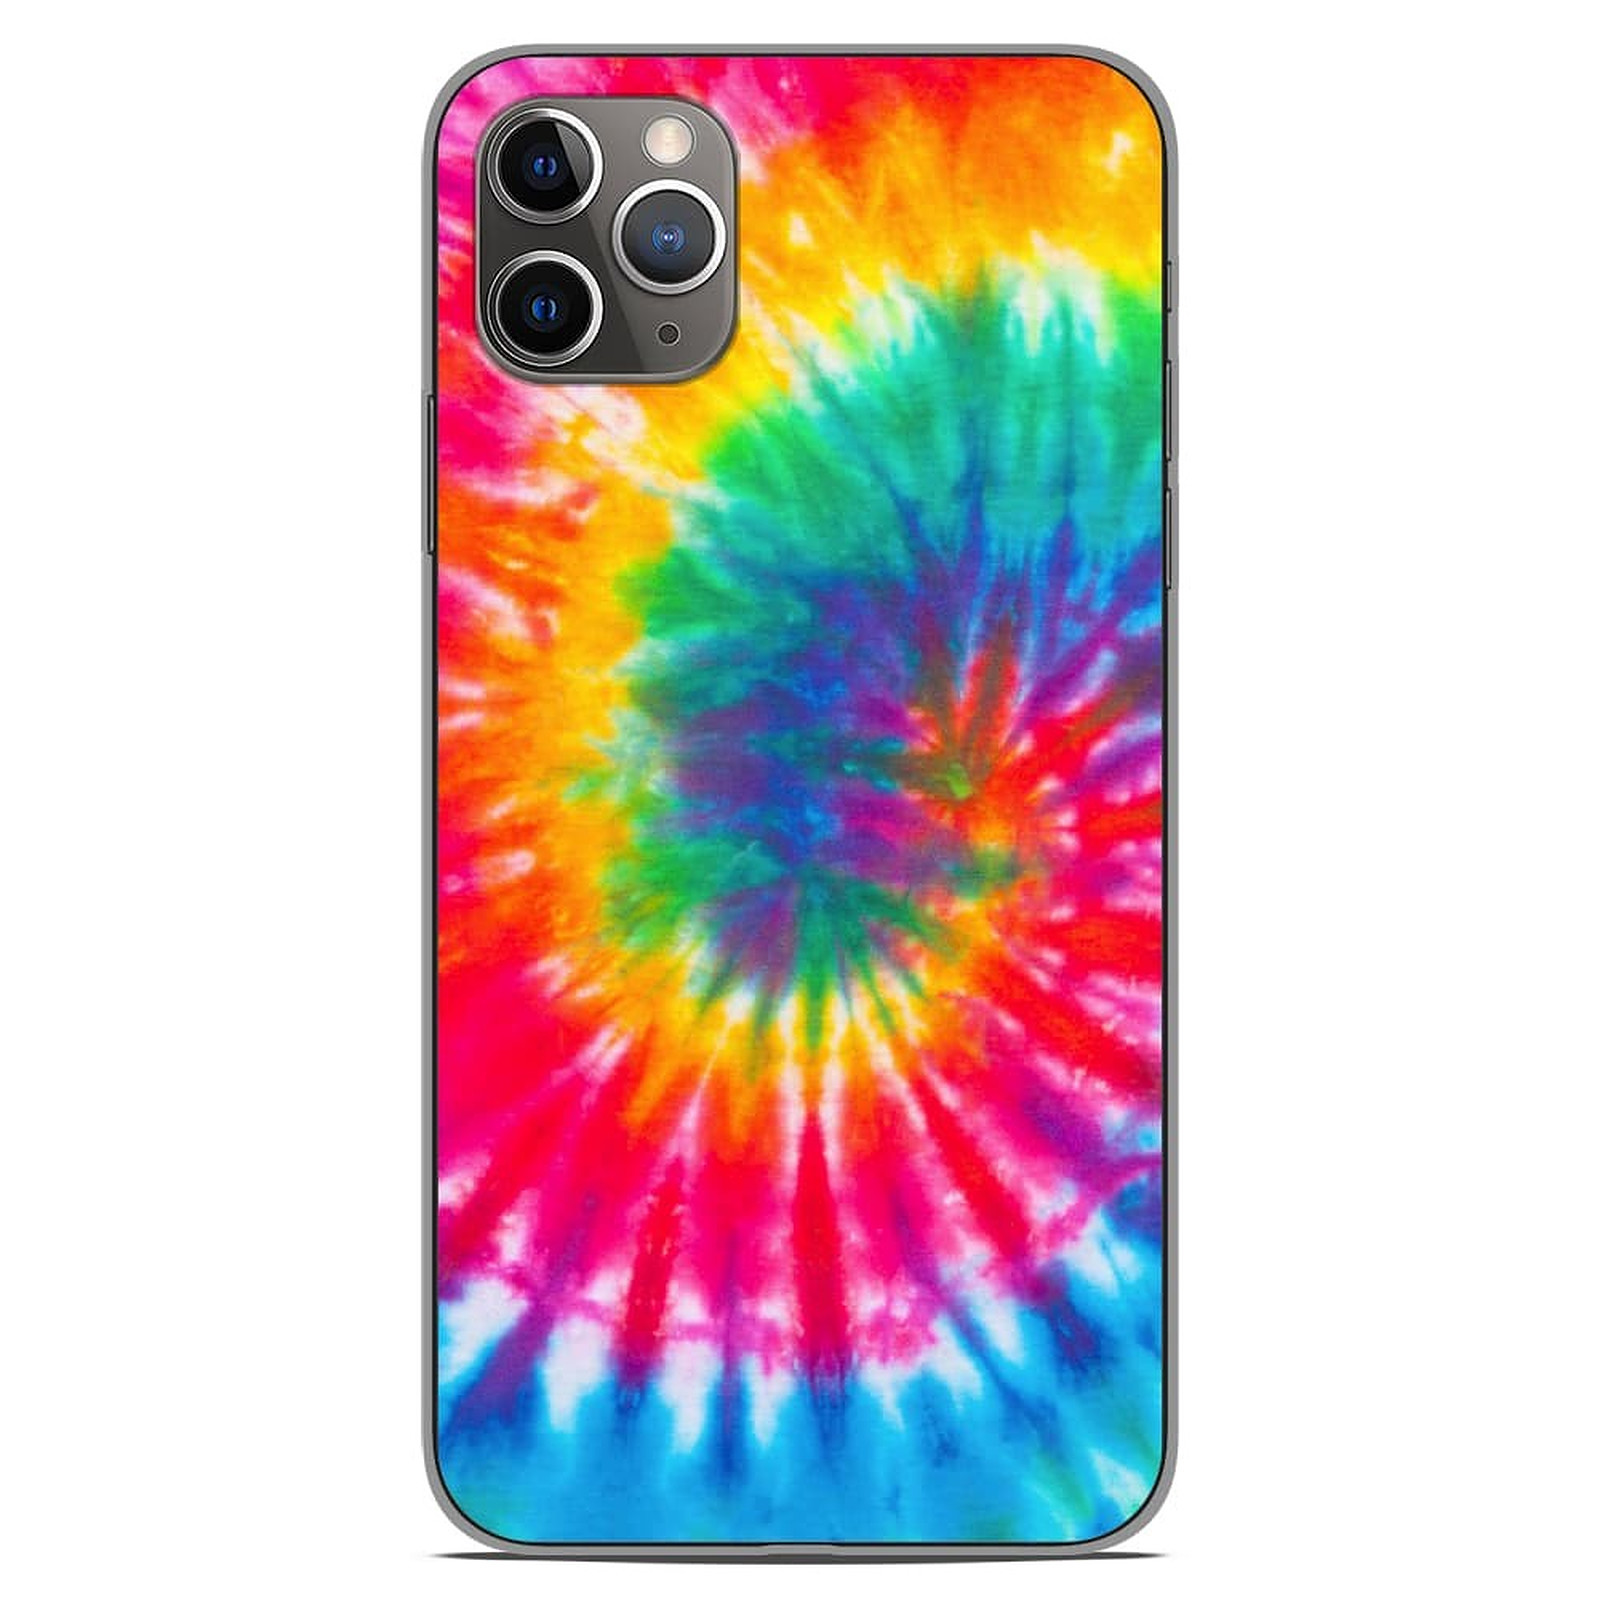 1001 Coques Coque silicone gel Apple iPhone 11 Pro Max motif Tie Dye Spirale - Coque telephone 1001Coques